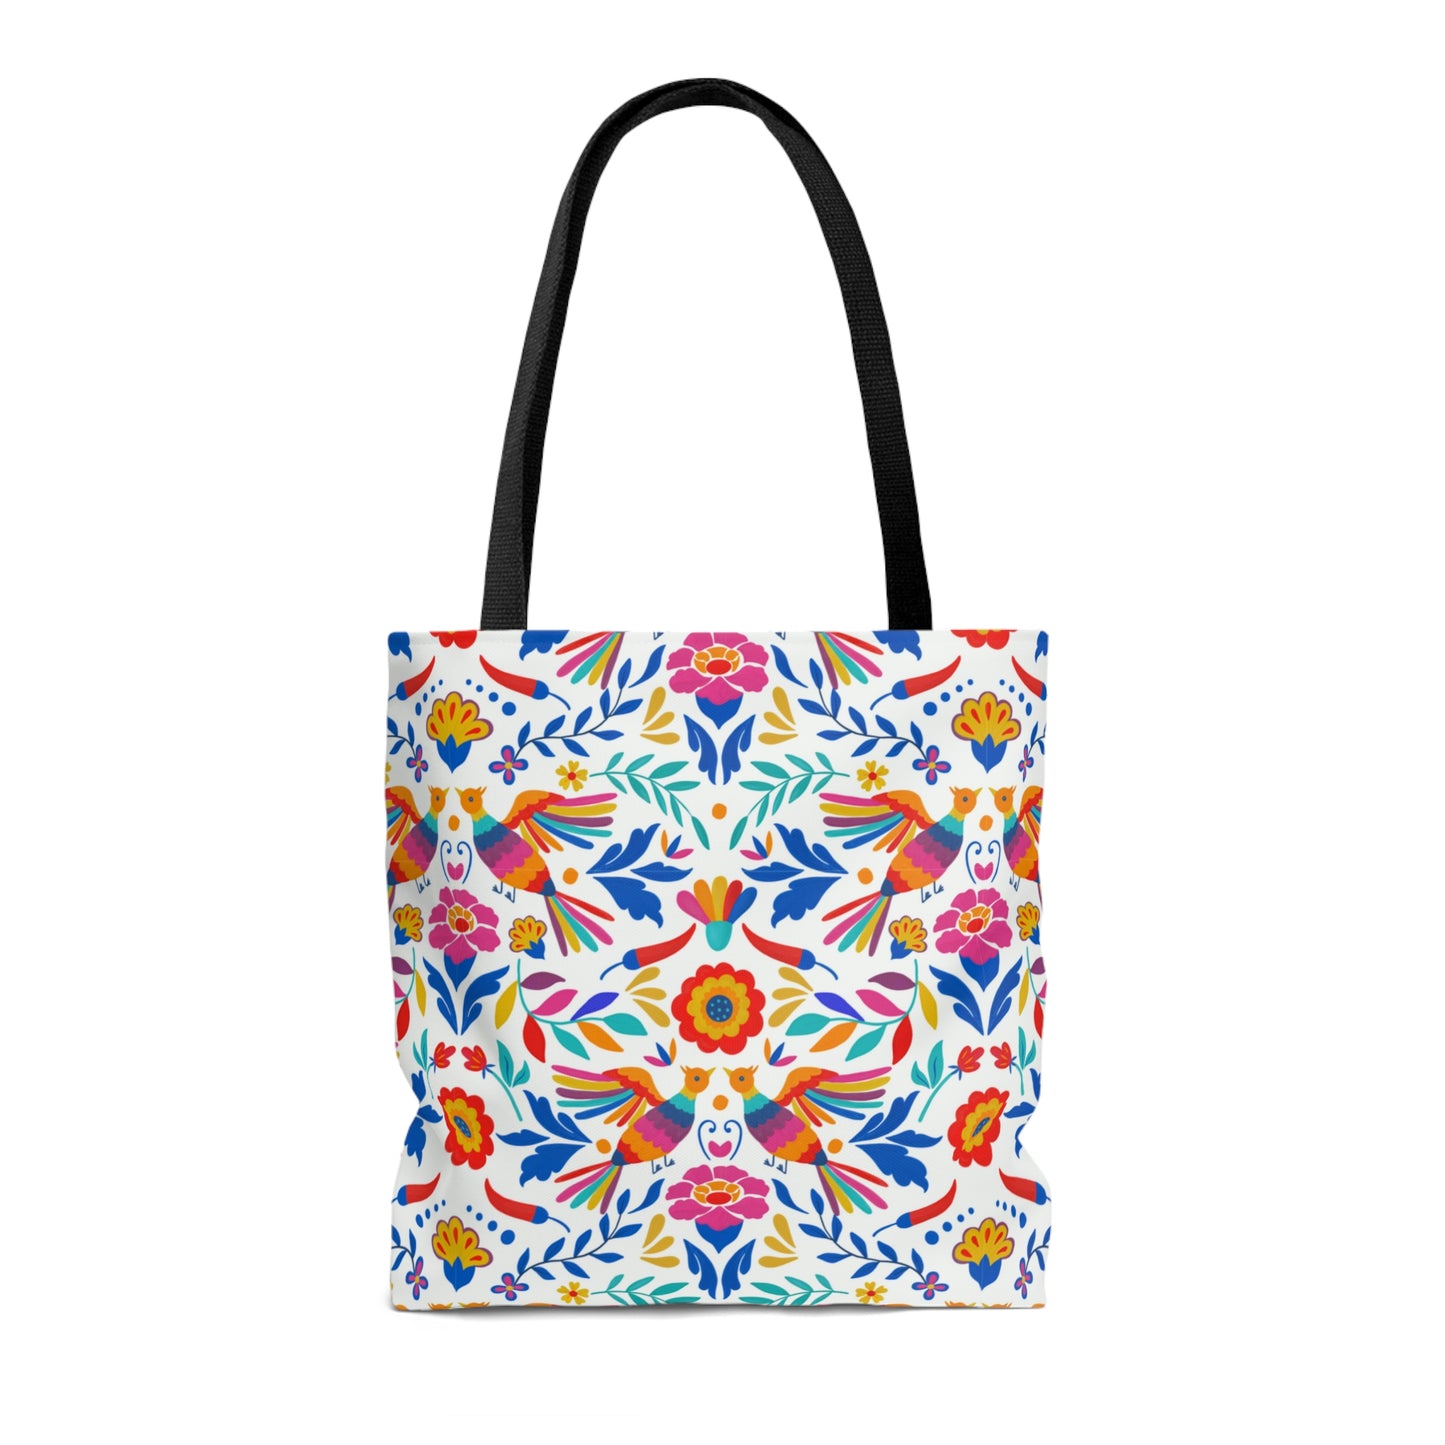 Colorful floral Tote Bag. Mexican folk tote bag for her.